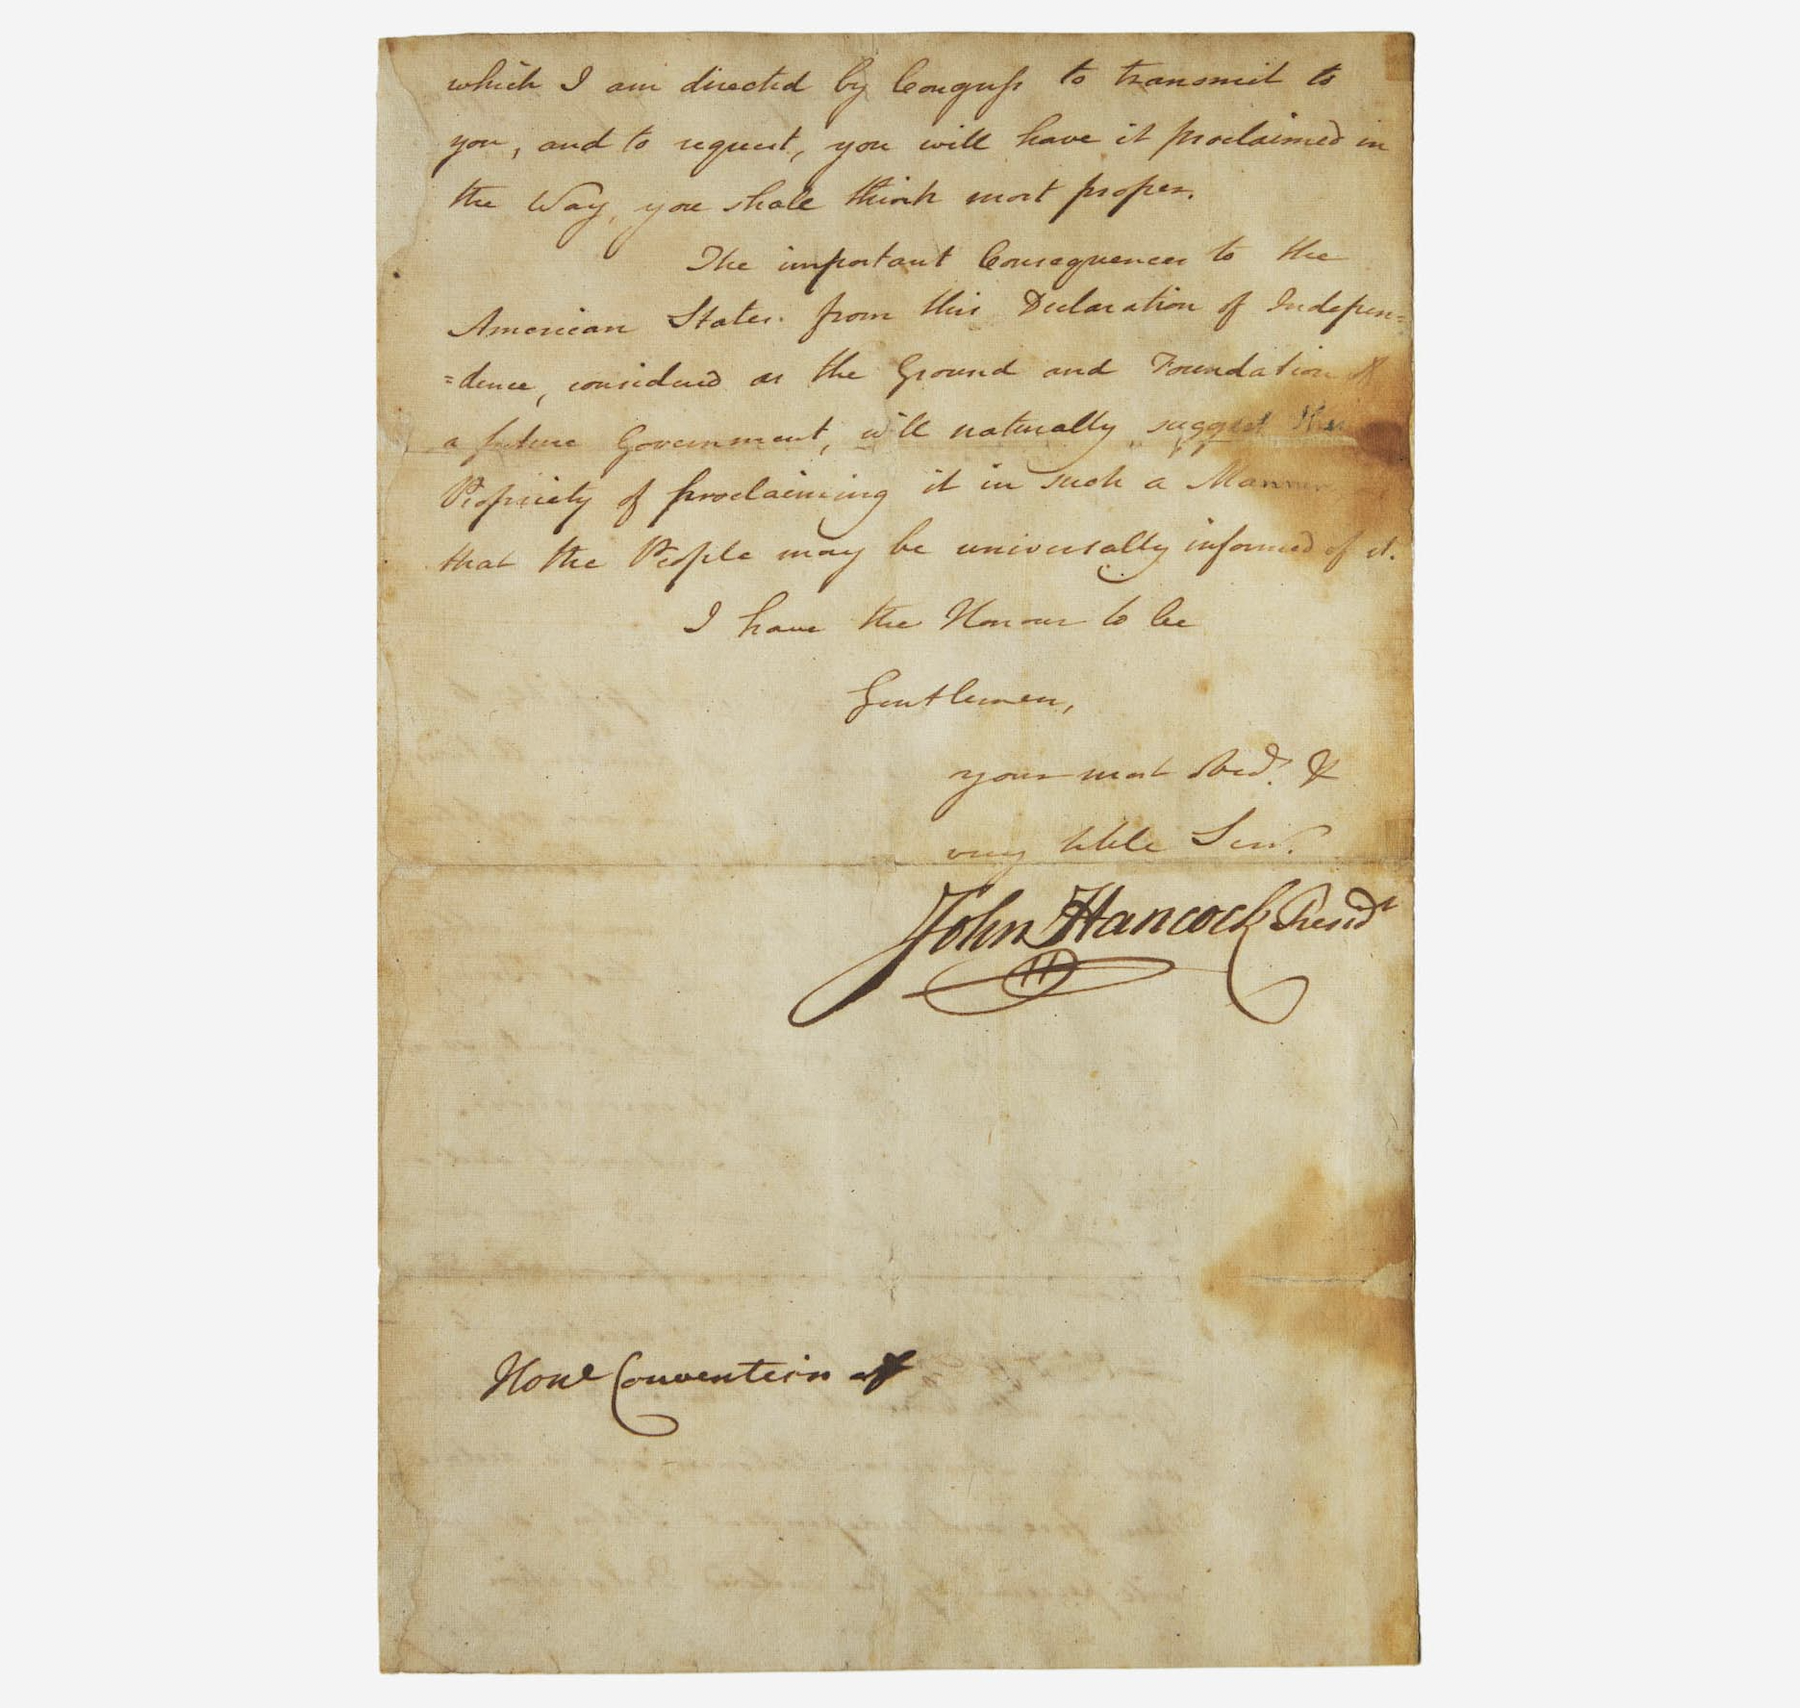 John Hancock’s 1776 letter to the state of Georgia proclaiming America’s Independence, $1.8 million